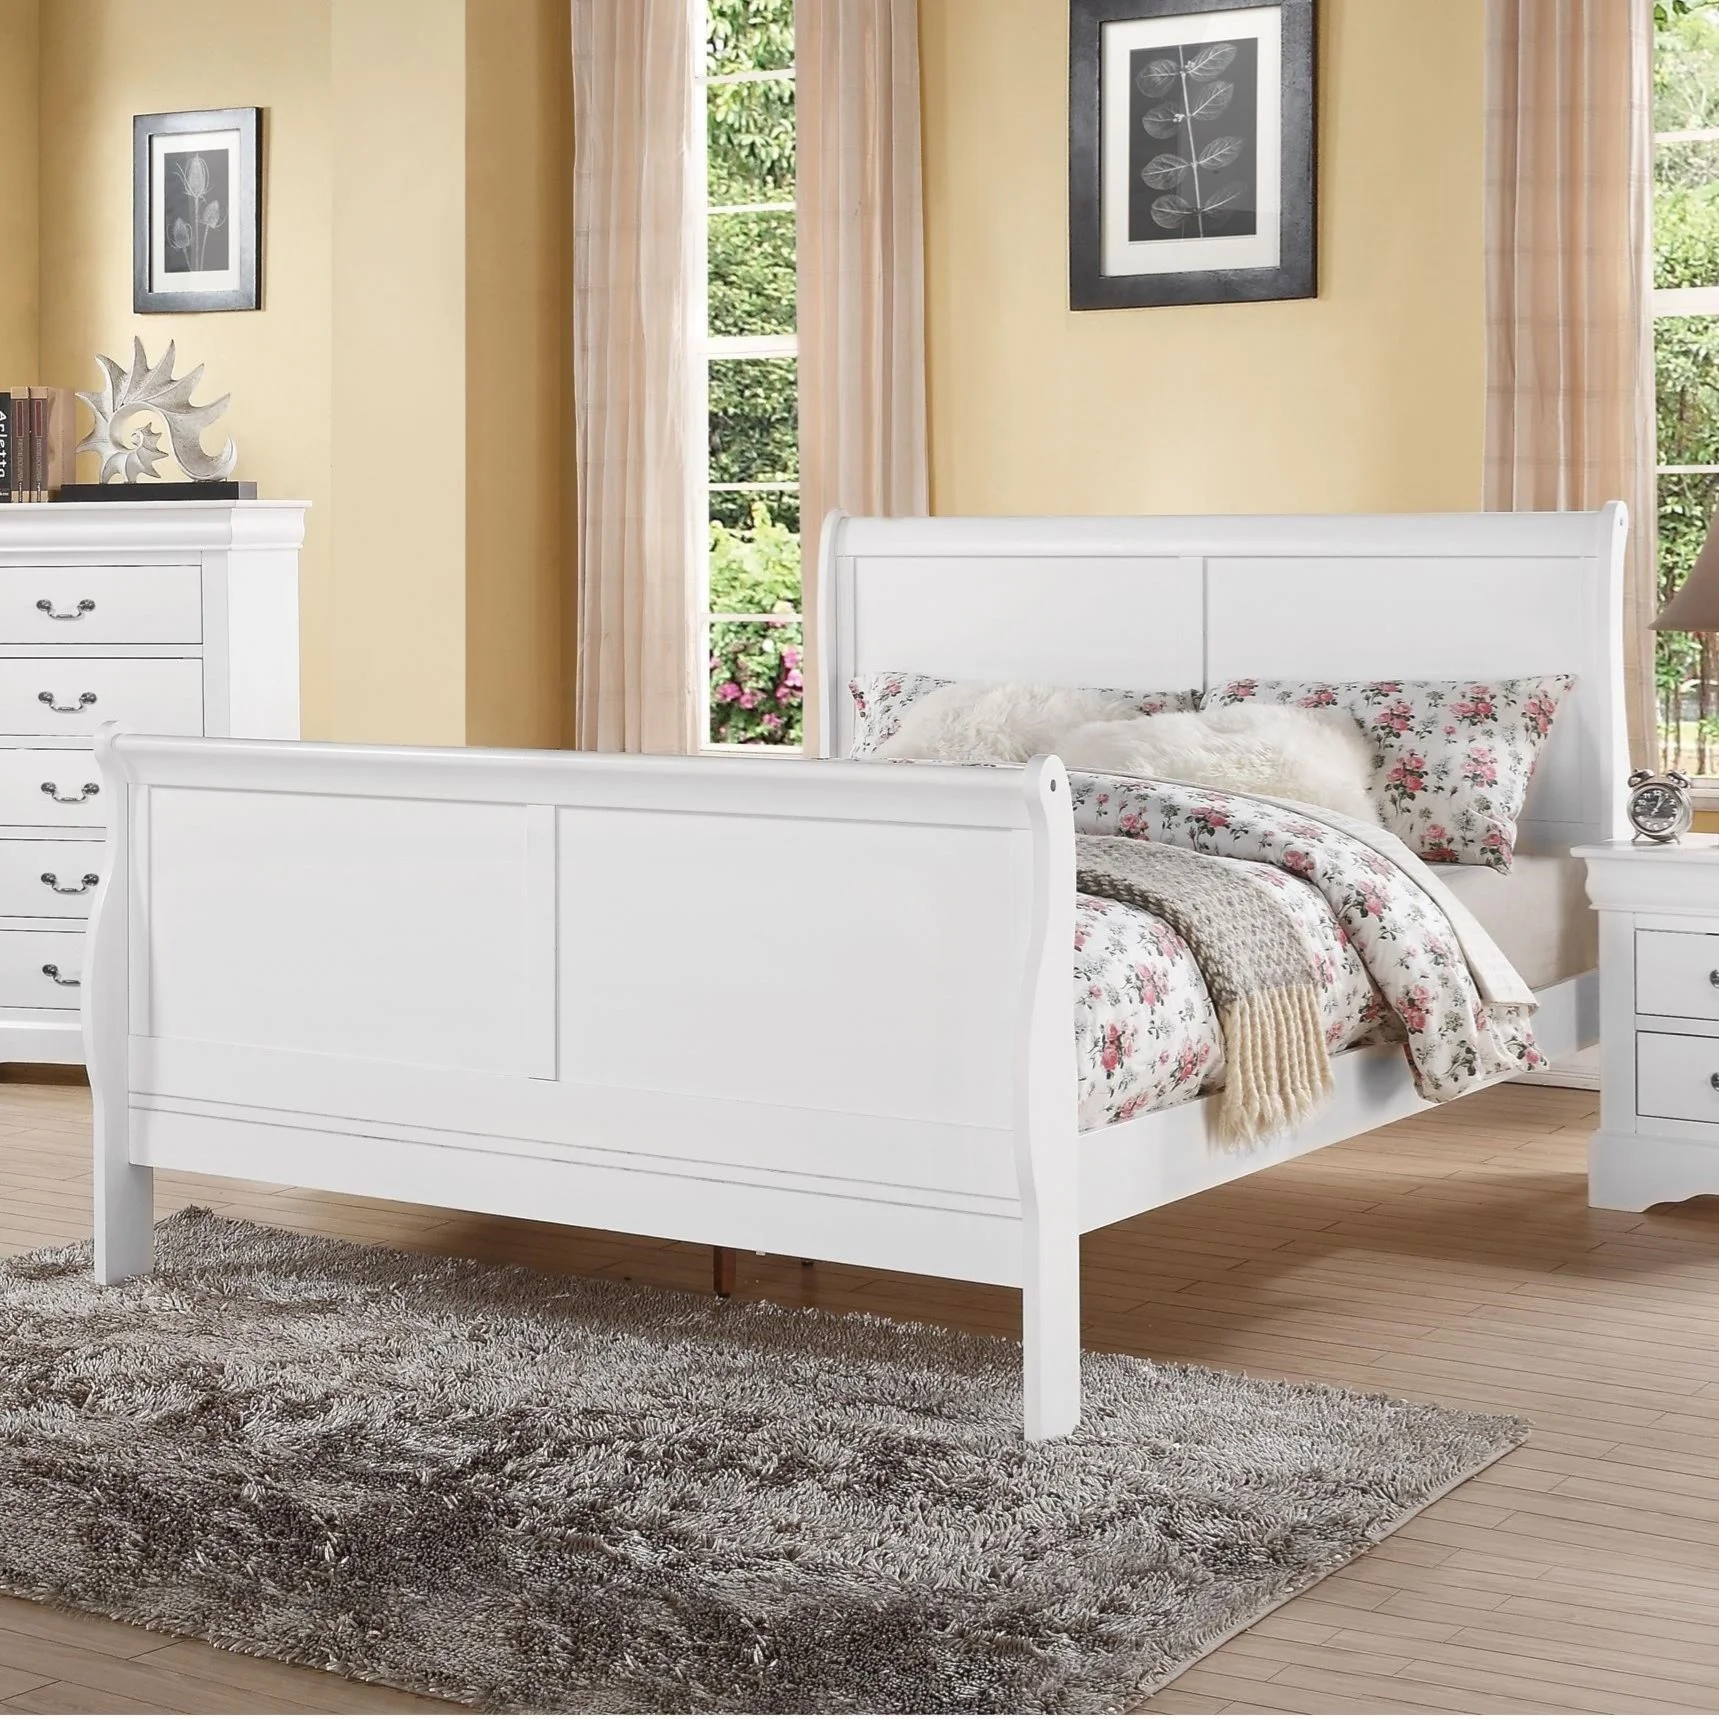 Acme Furniture Louis Philippe III 19520Q Queen Transitional Sleigh Bed, Value City Furniture